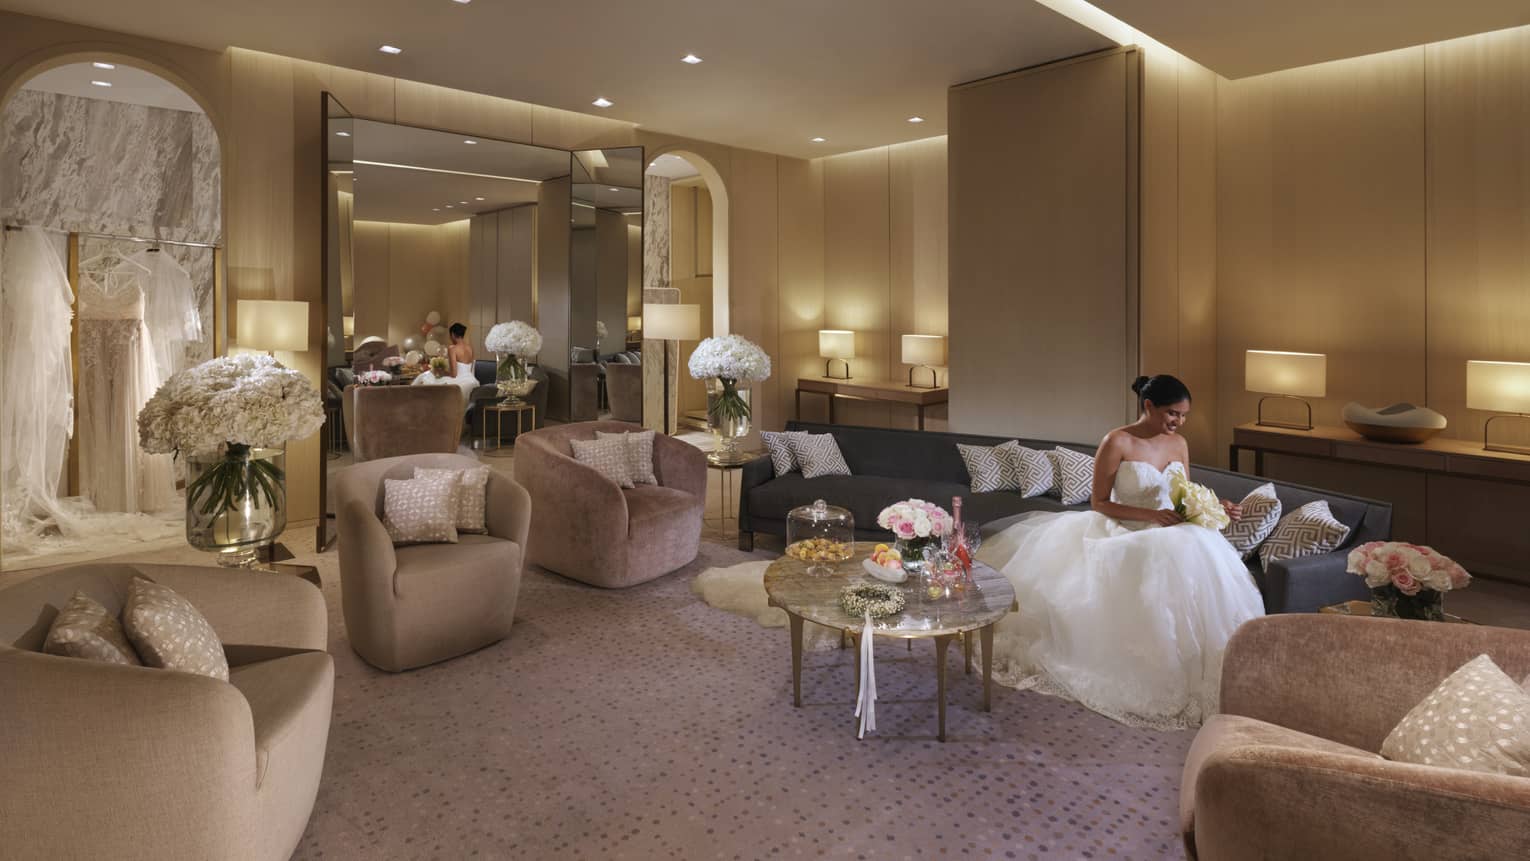 A bride dressed in her wedding dress, sits on a dark couch and reads a note in the bridal suite